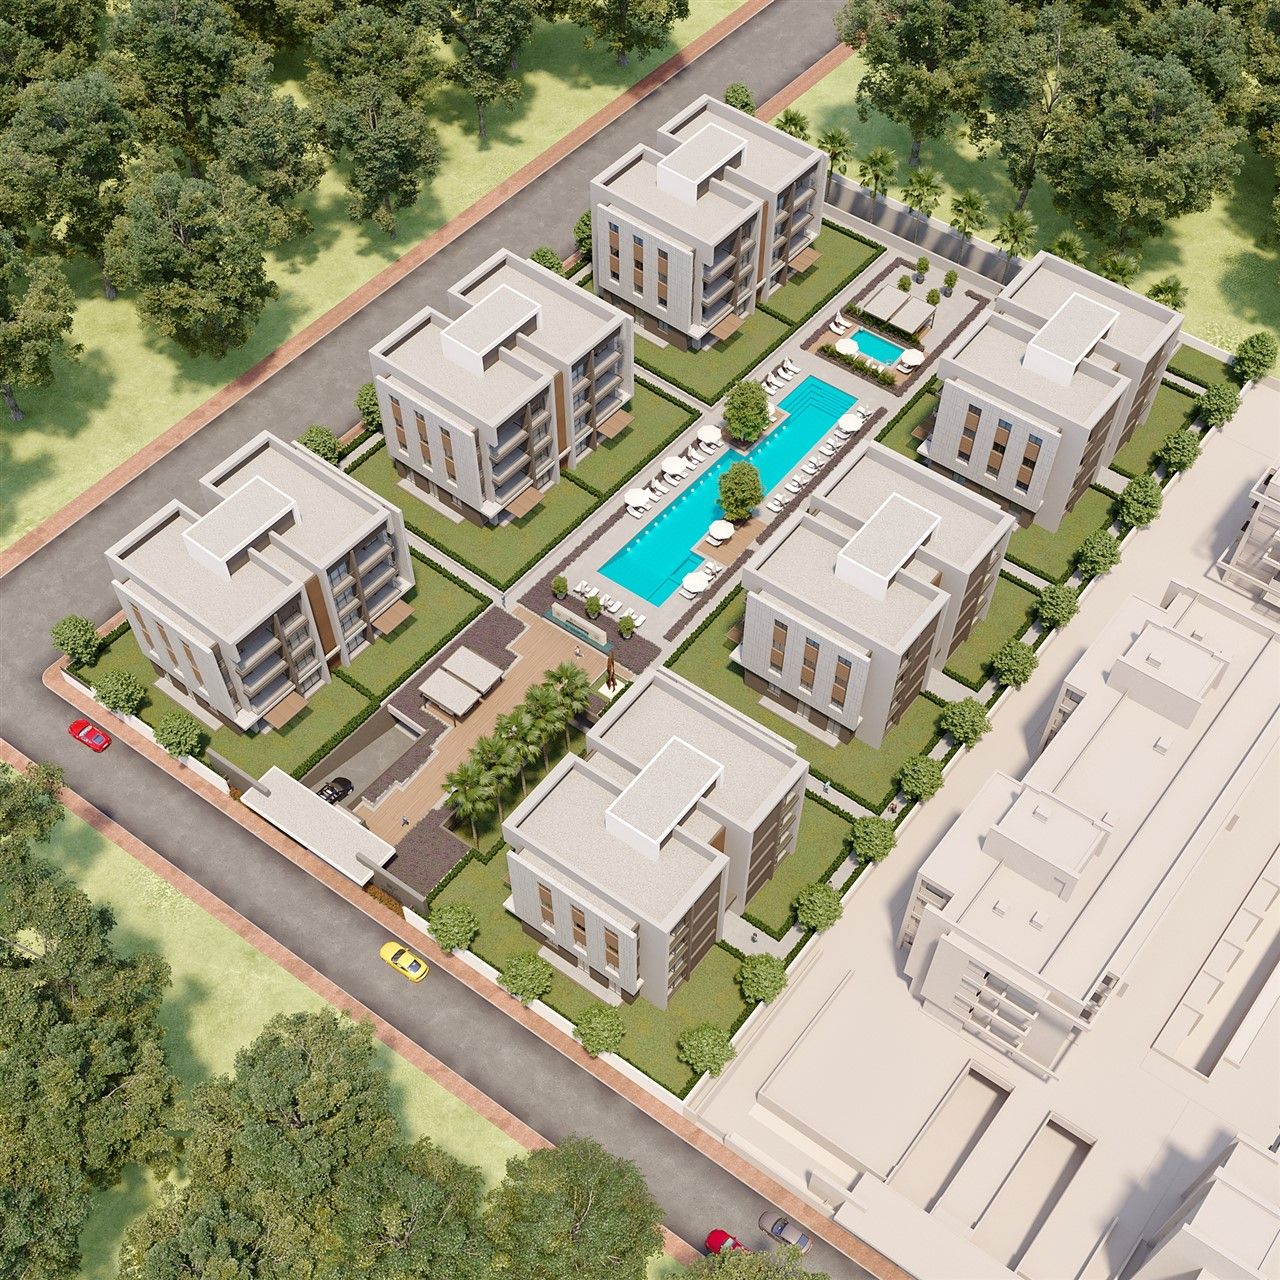 Apartments at the final stage of construction in Antalya, Konyaalti district